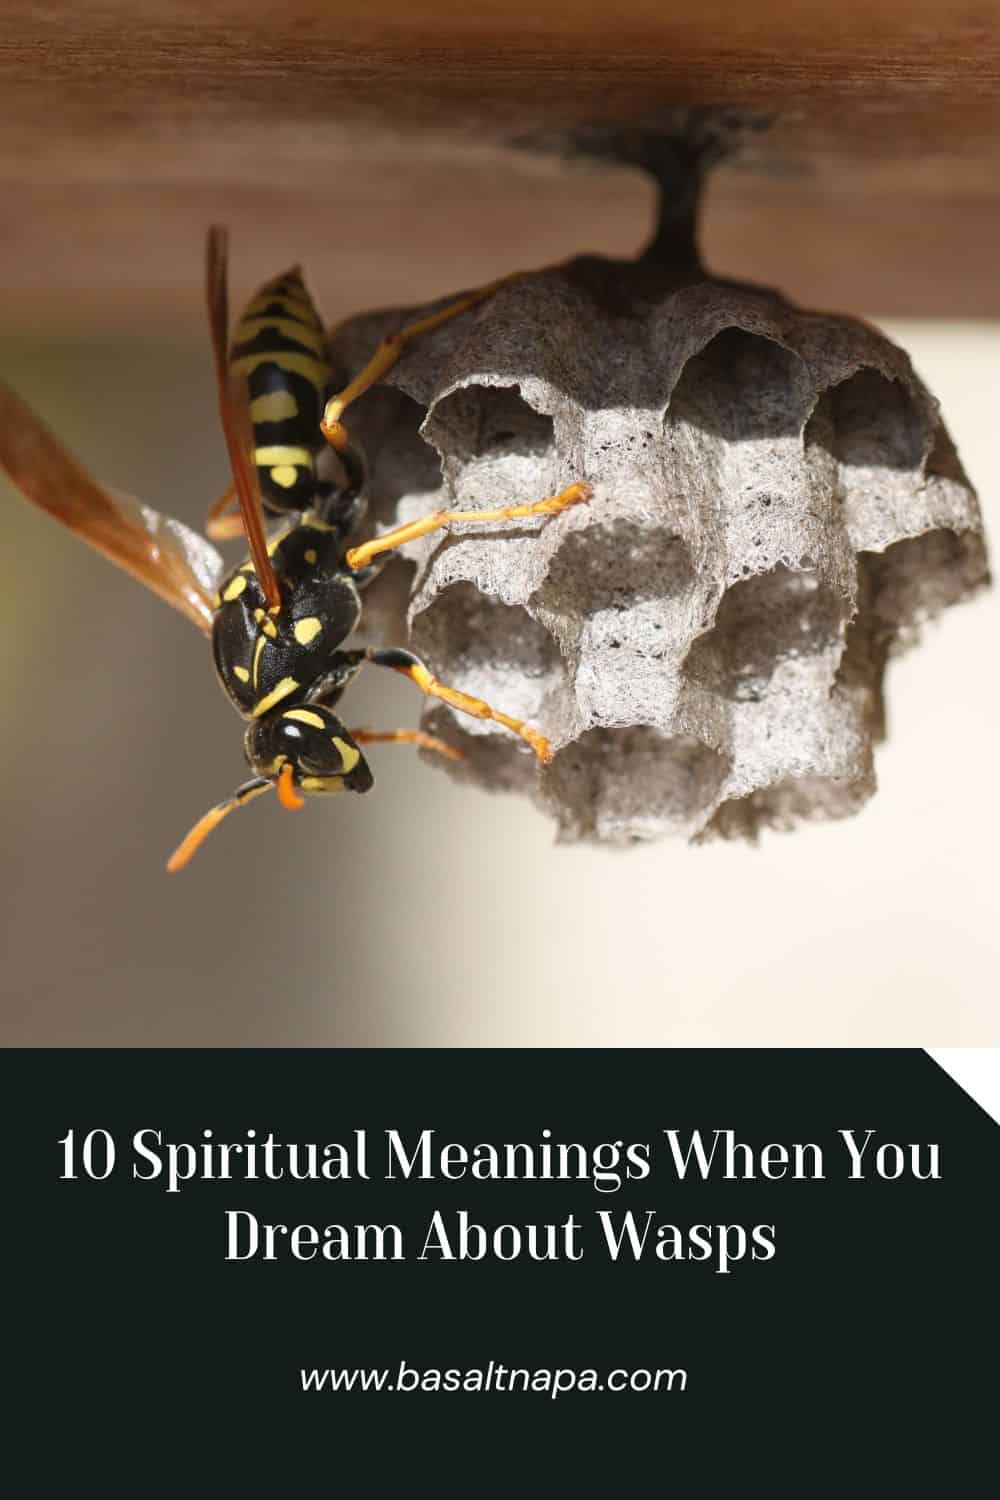 10 Spiritual Meanings When You Dream About Wasps